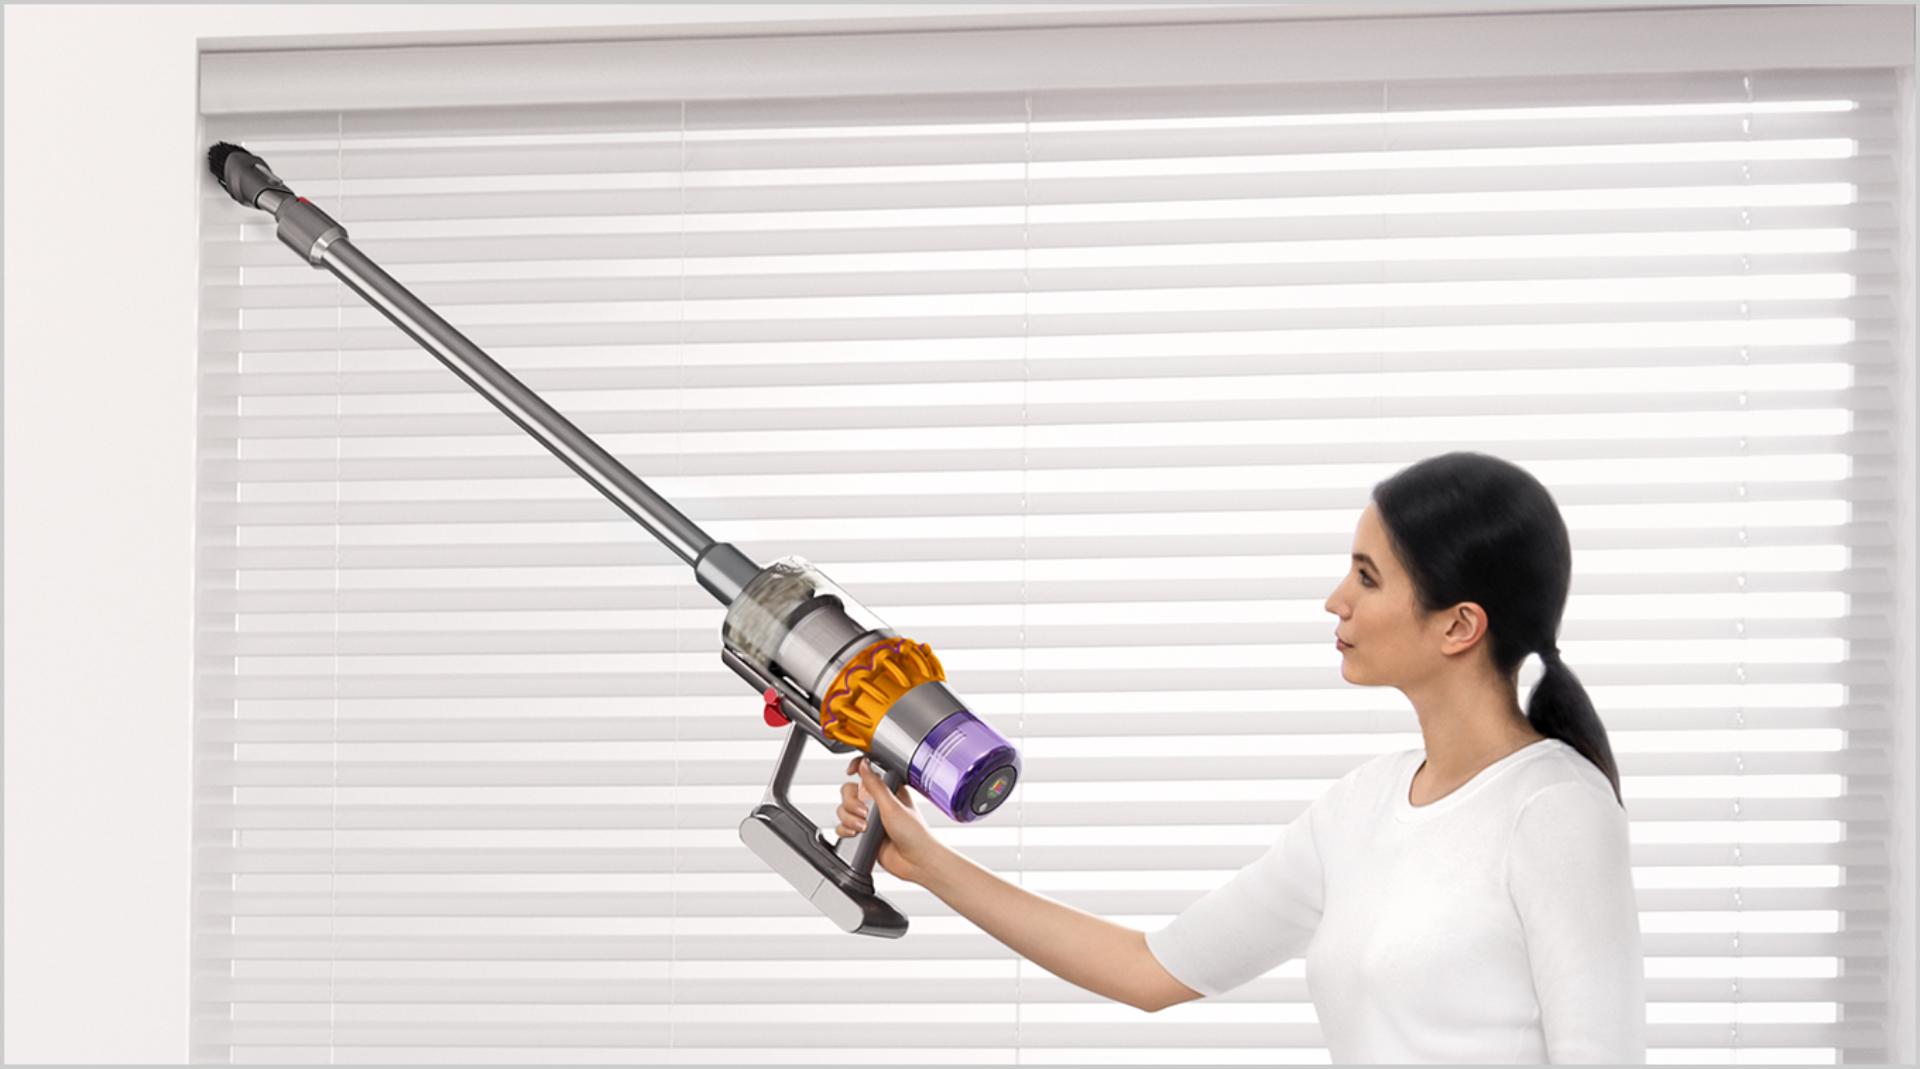 Dyson V15 Detect vacuum cleaning in handheld mode